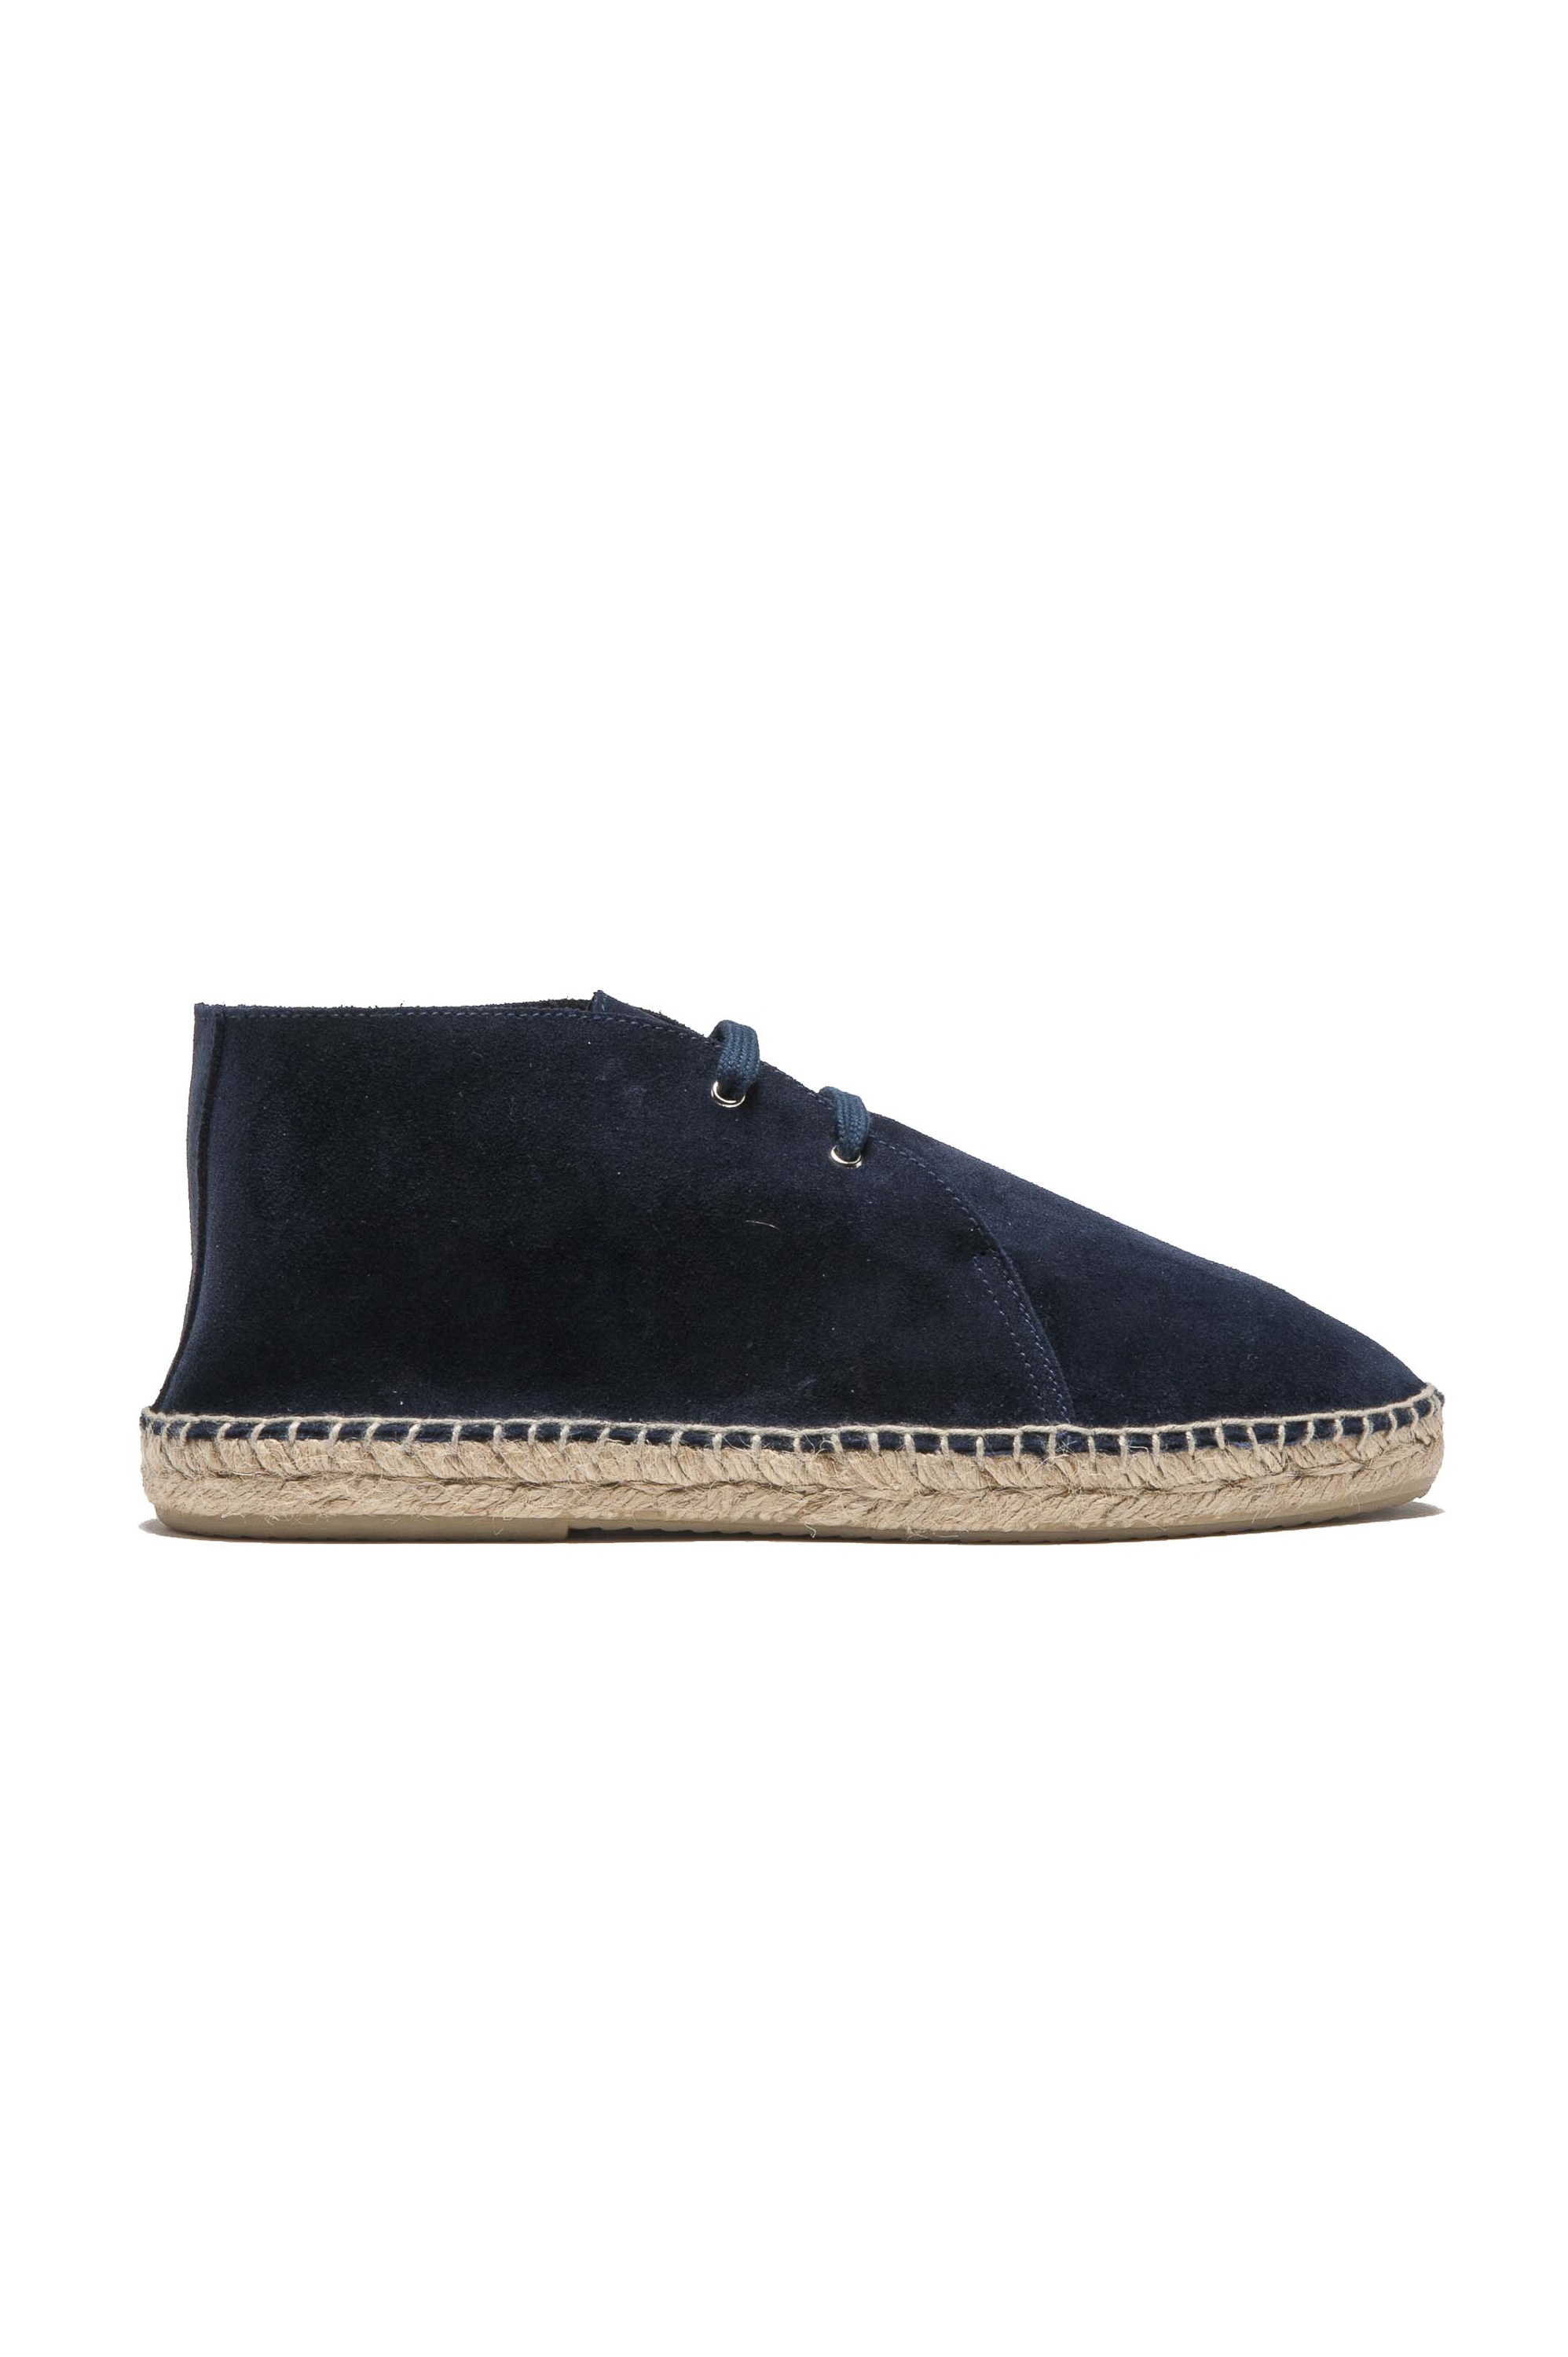 SBU 03184_2021SS Original blue suede leather lace up espadrilles with rubber sole 01